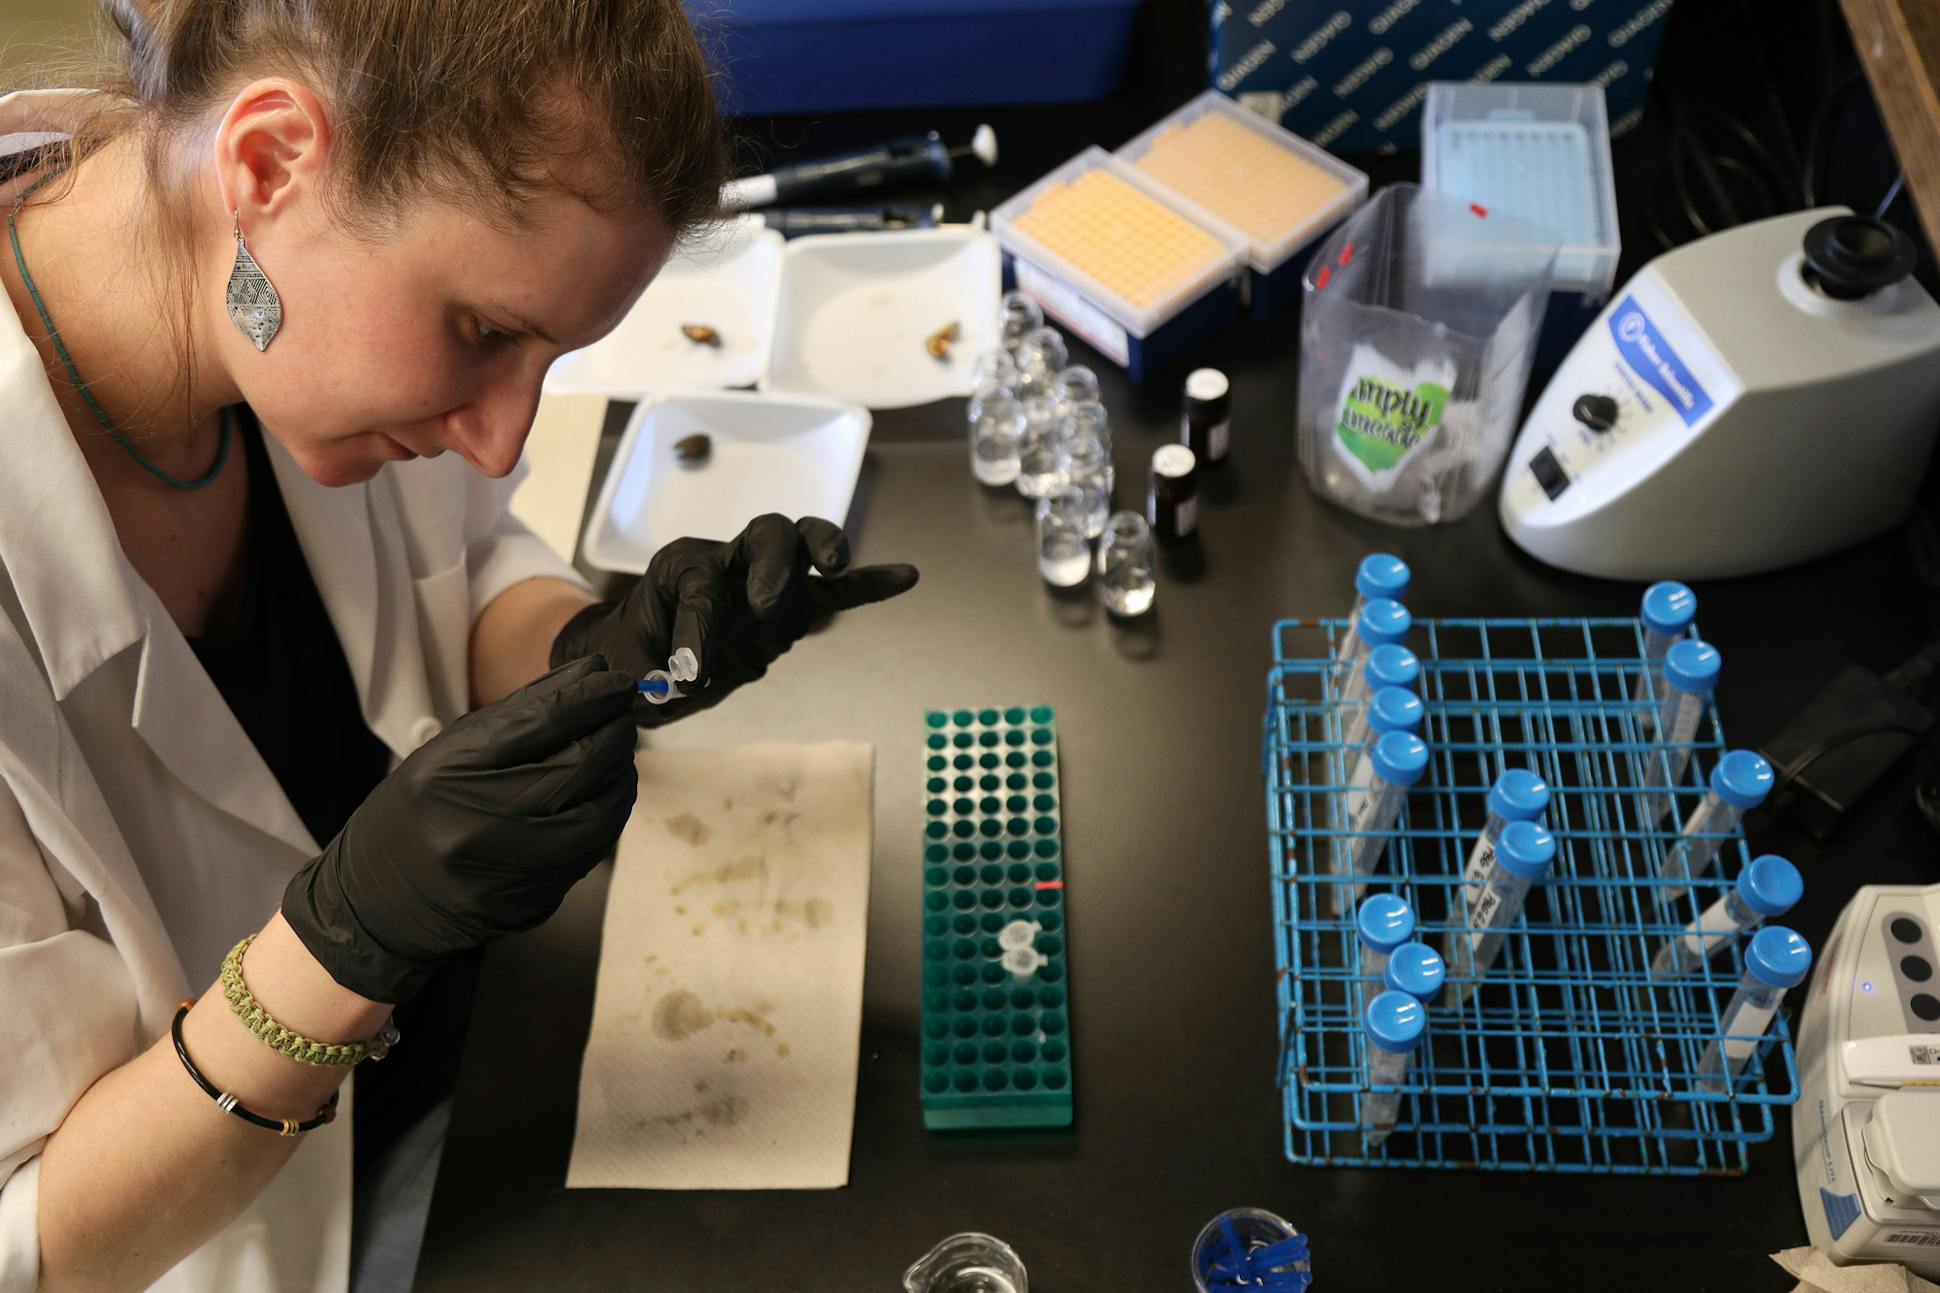 Sophie Mallez extracted DNA from a zebra mussel. Decoding its DNA profile could reveal how to kill the invasive species.